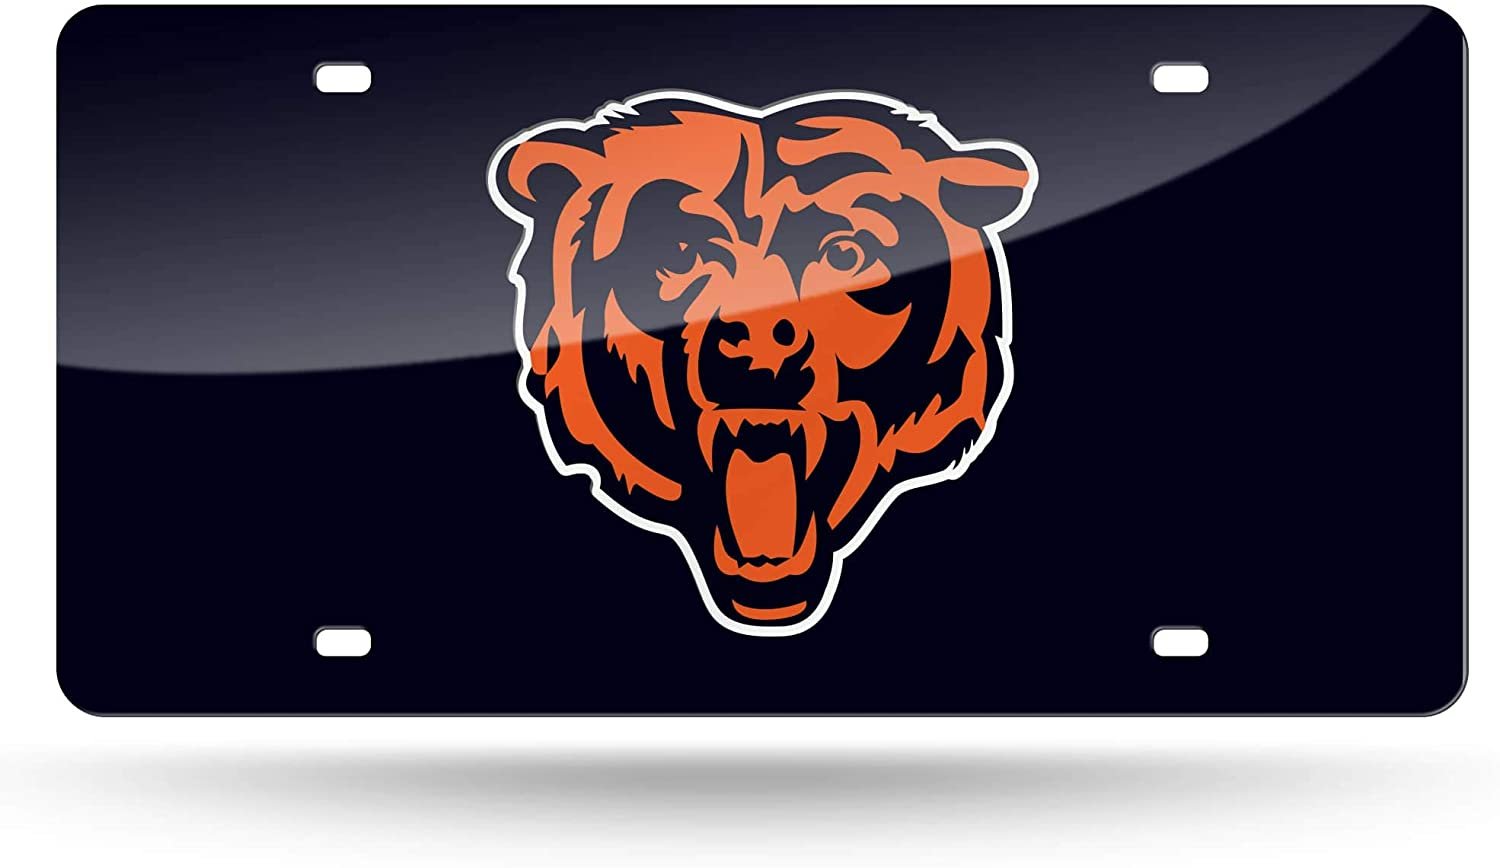 Chicago Bears Premium Laser Cut Tag License Plate, Mascot, Blue Mirrored Acrylic Inlaid, 12x6 Inch